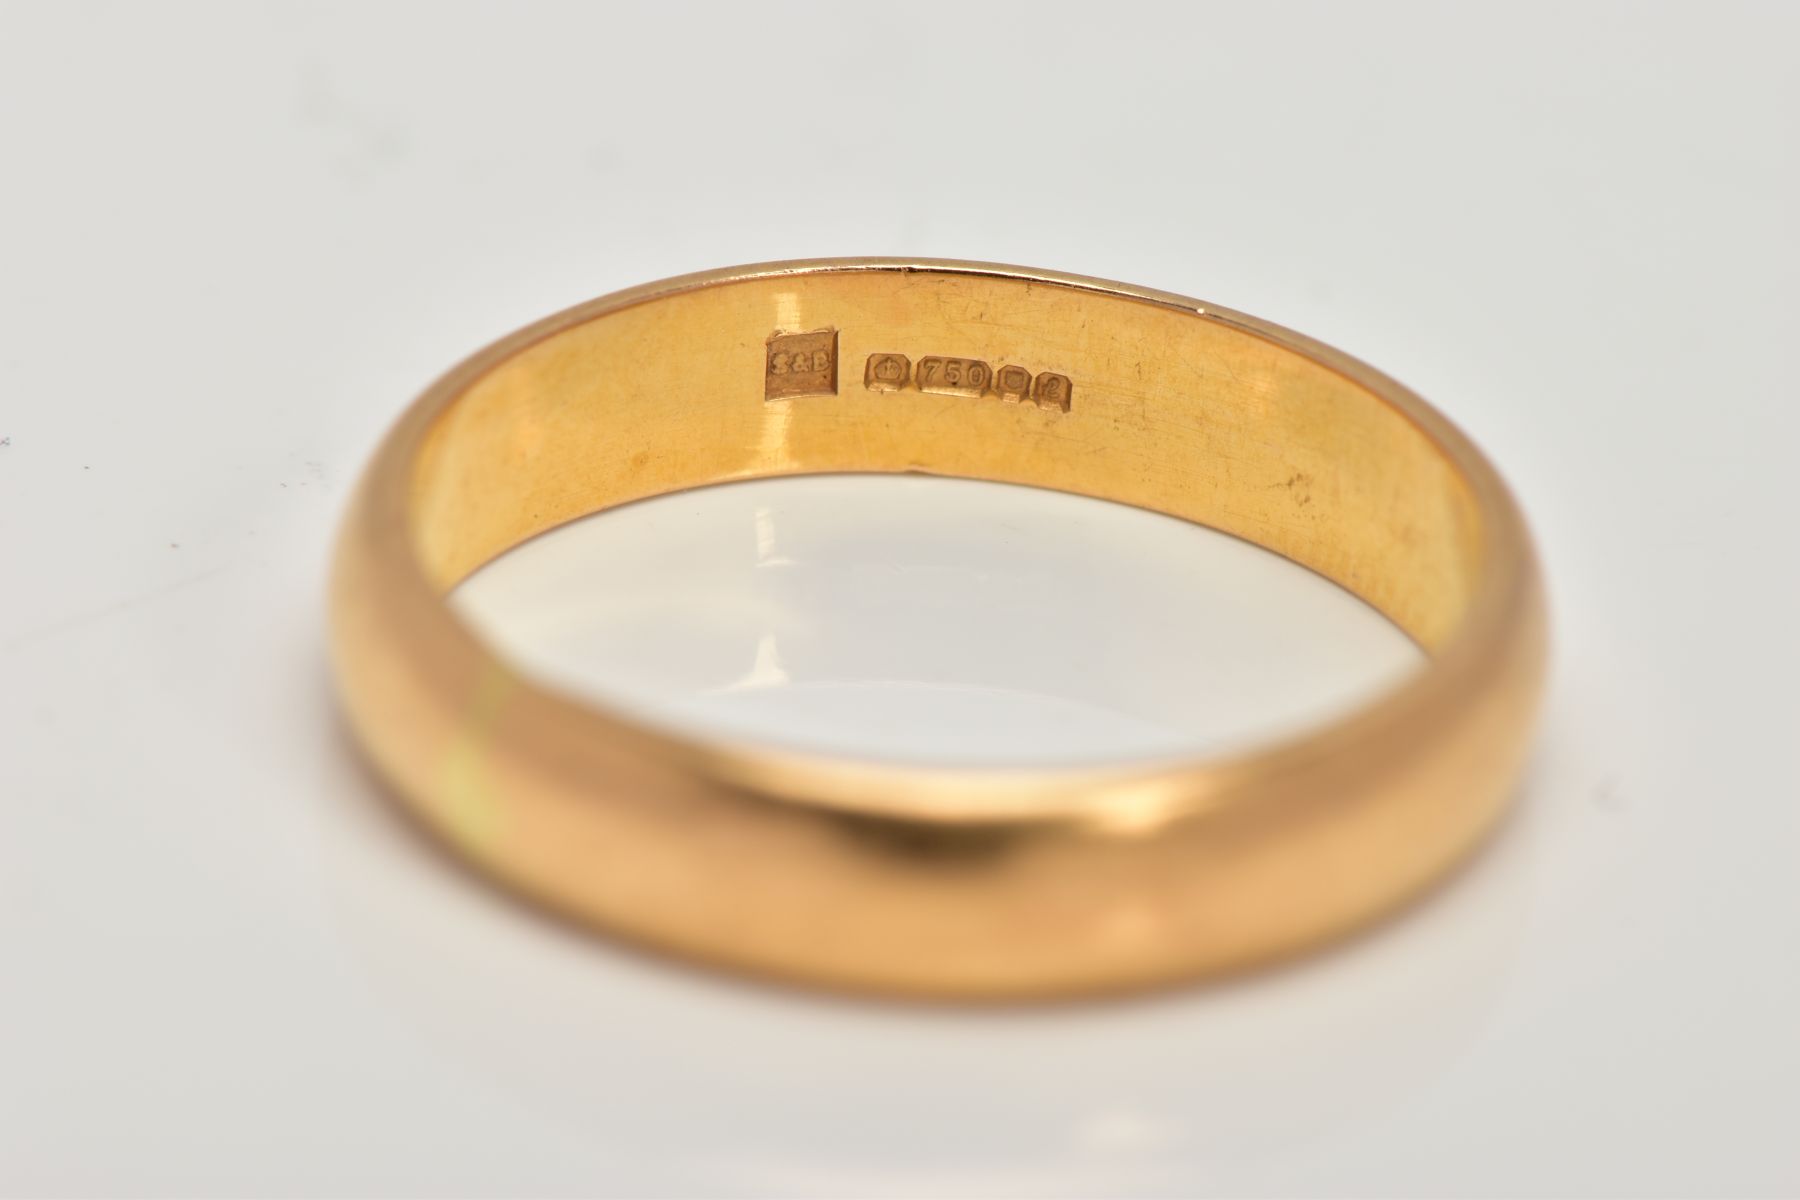 AN 18CT GOLD WEDDING BAND, of a plain polished design, hallmarked 18ct gold London, ring size Q, - Image 2 of 2